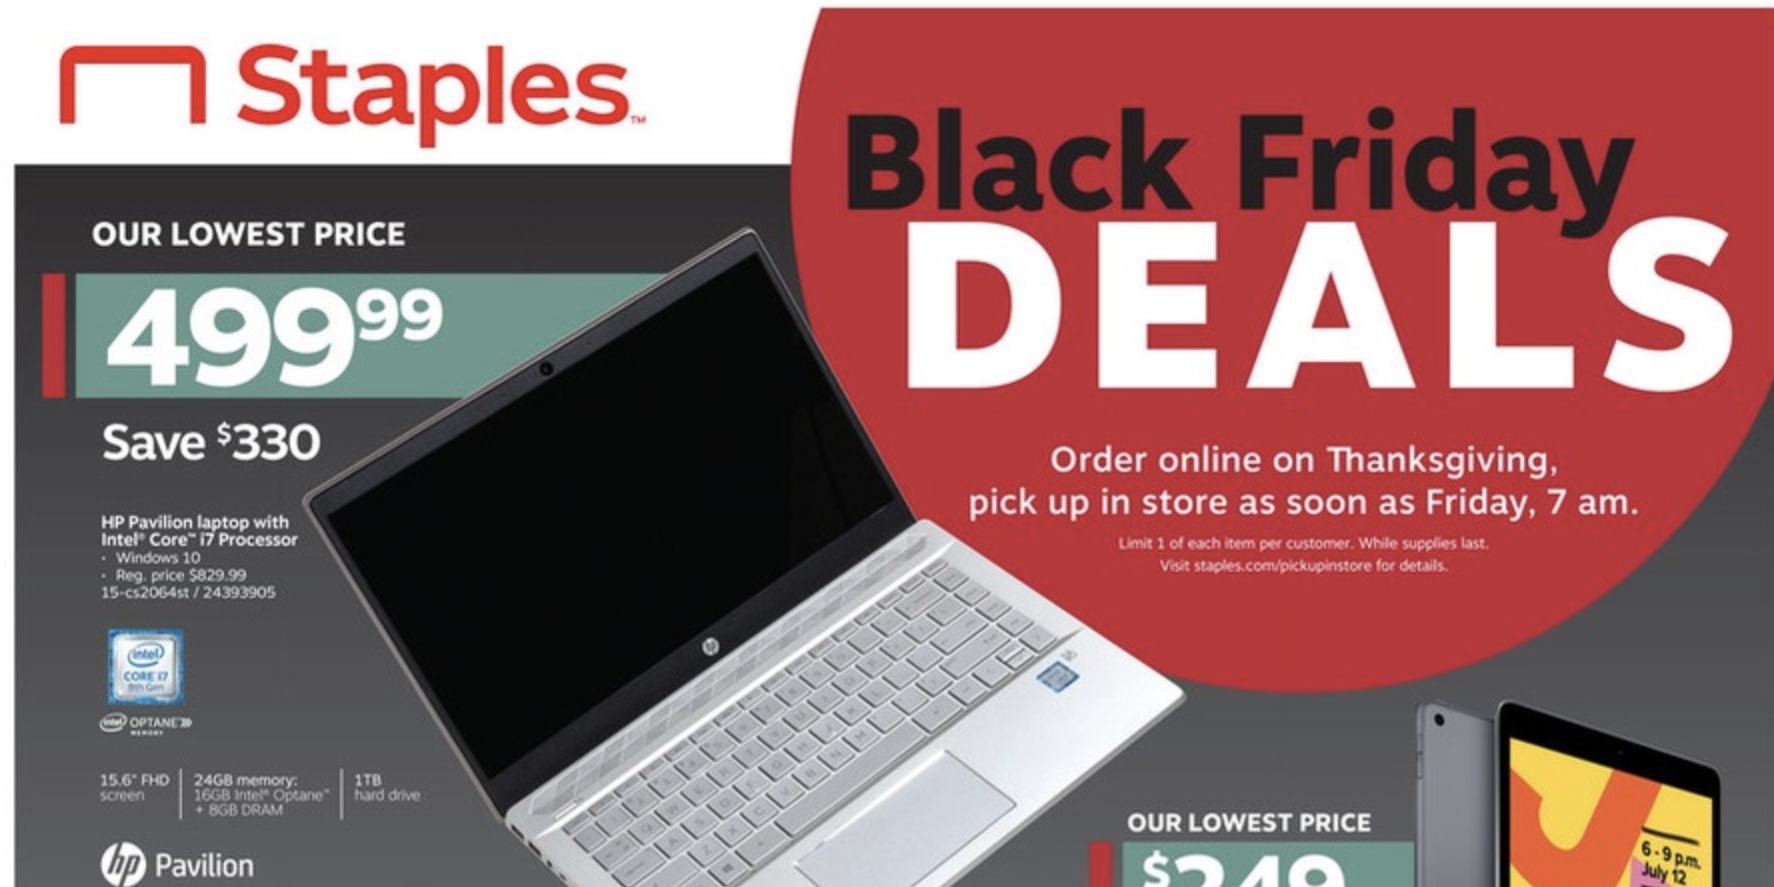 Staples Black Friday Ad has deals on iPads, Echos, more - 9to5Toys